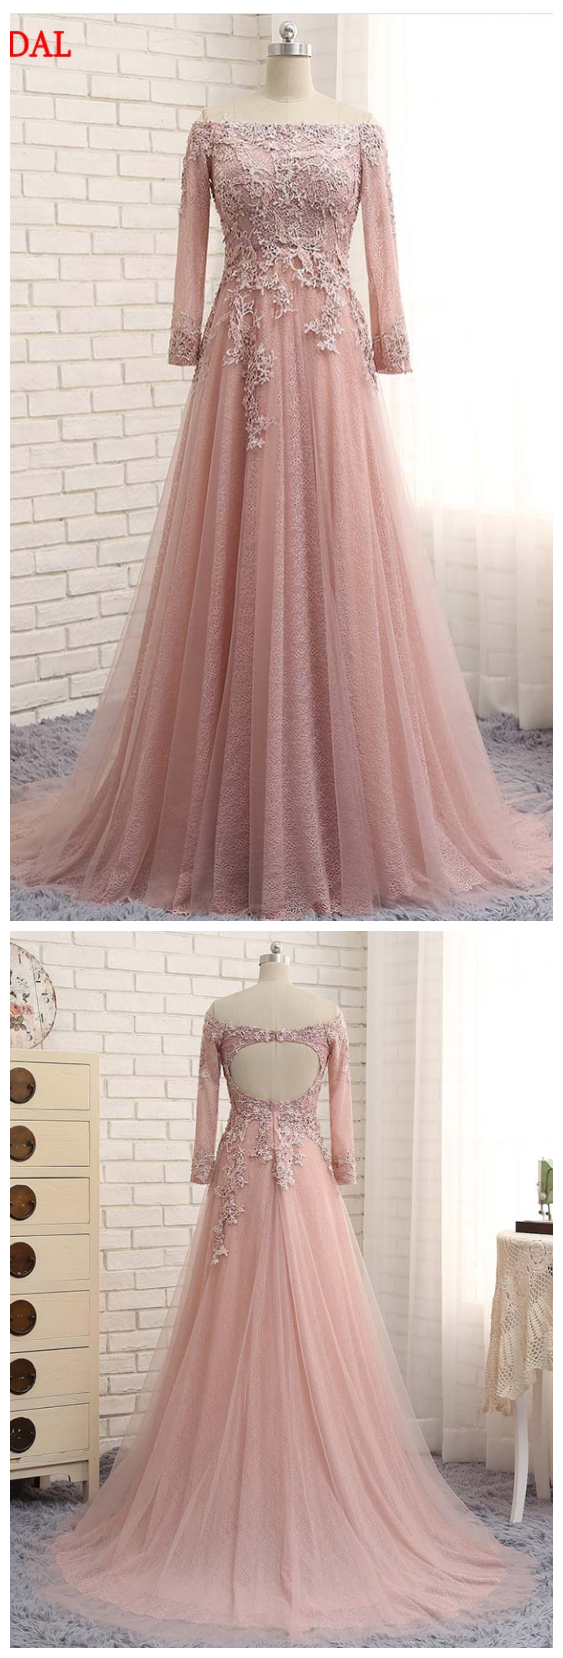 Lace Evening Dresses ,party Tulle A Line Off Shoulder Beautiful Women Prom Formal Evening Gowns Dresses